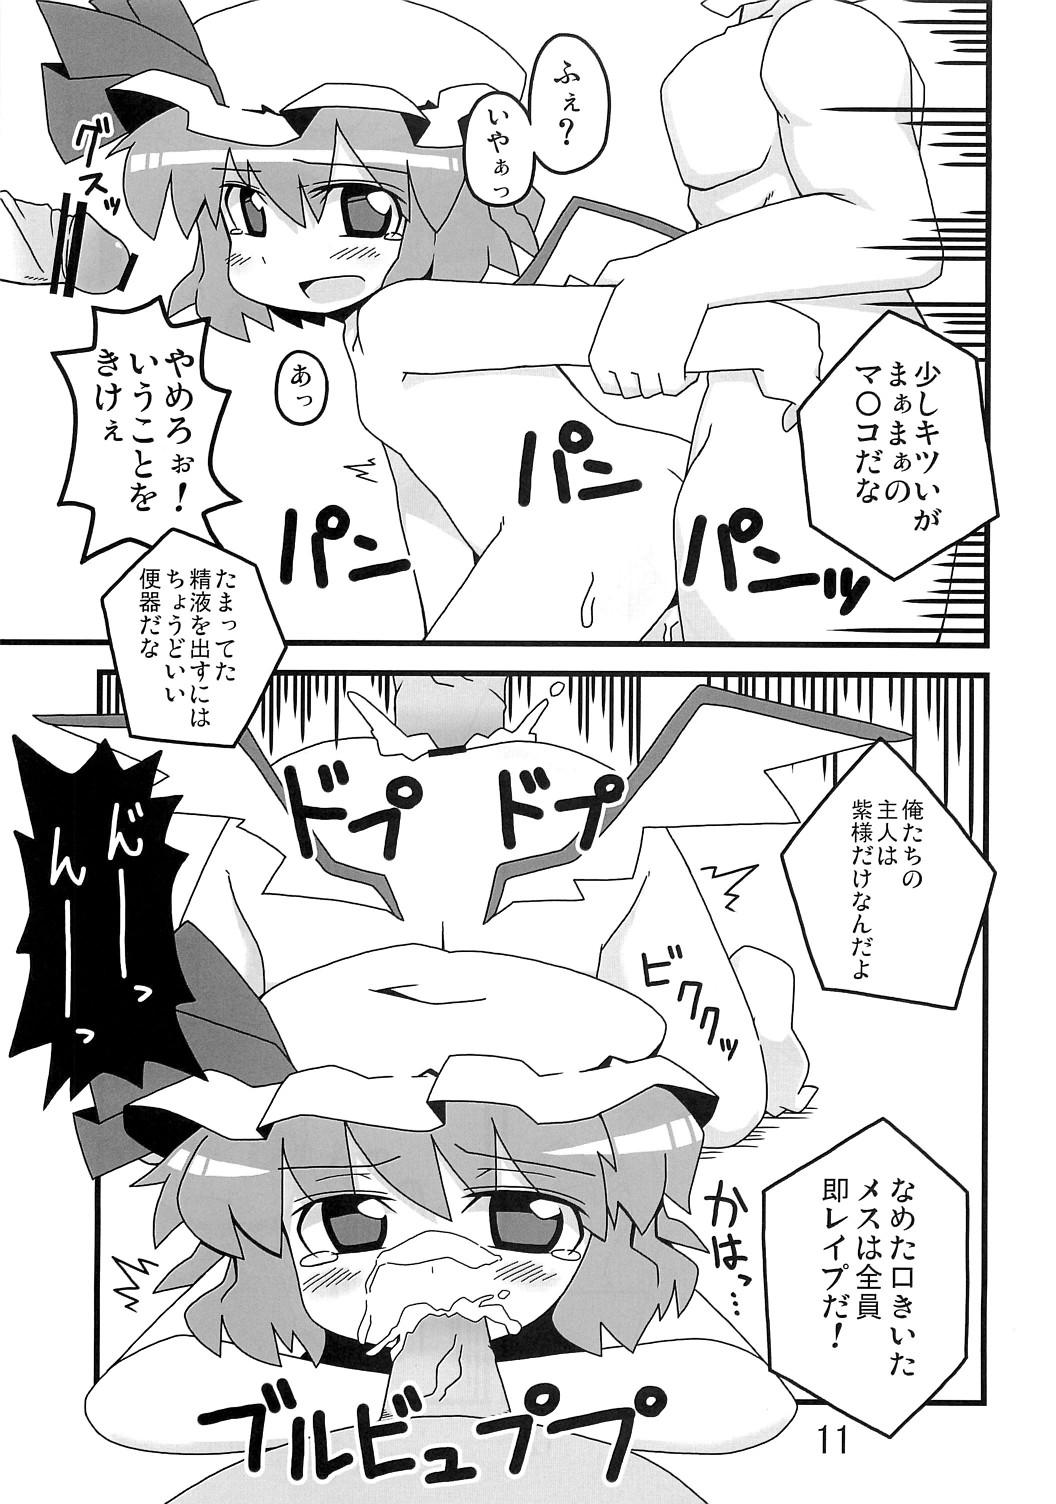 Affair 東方豊年祭 - Touhou project Titties - Page 10